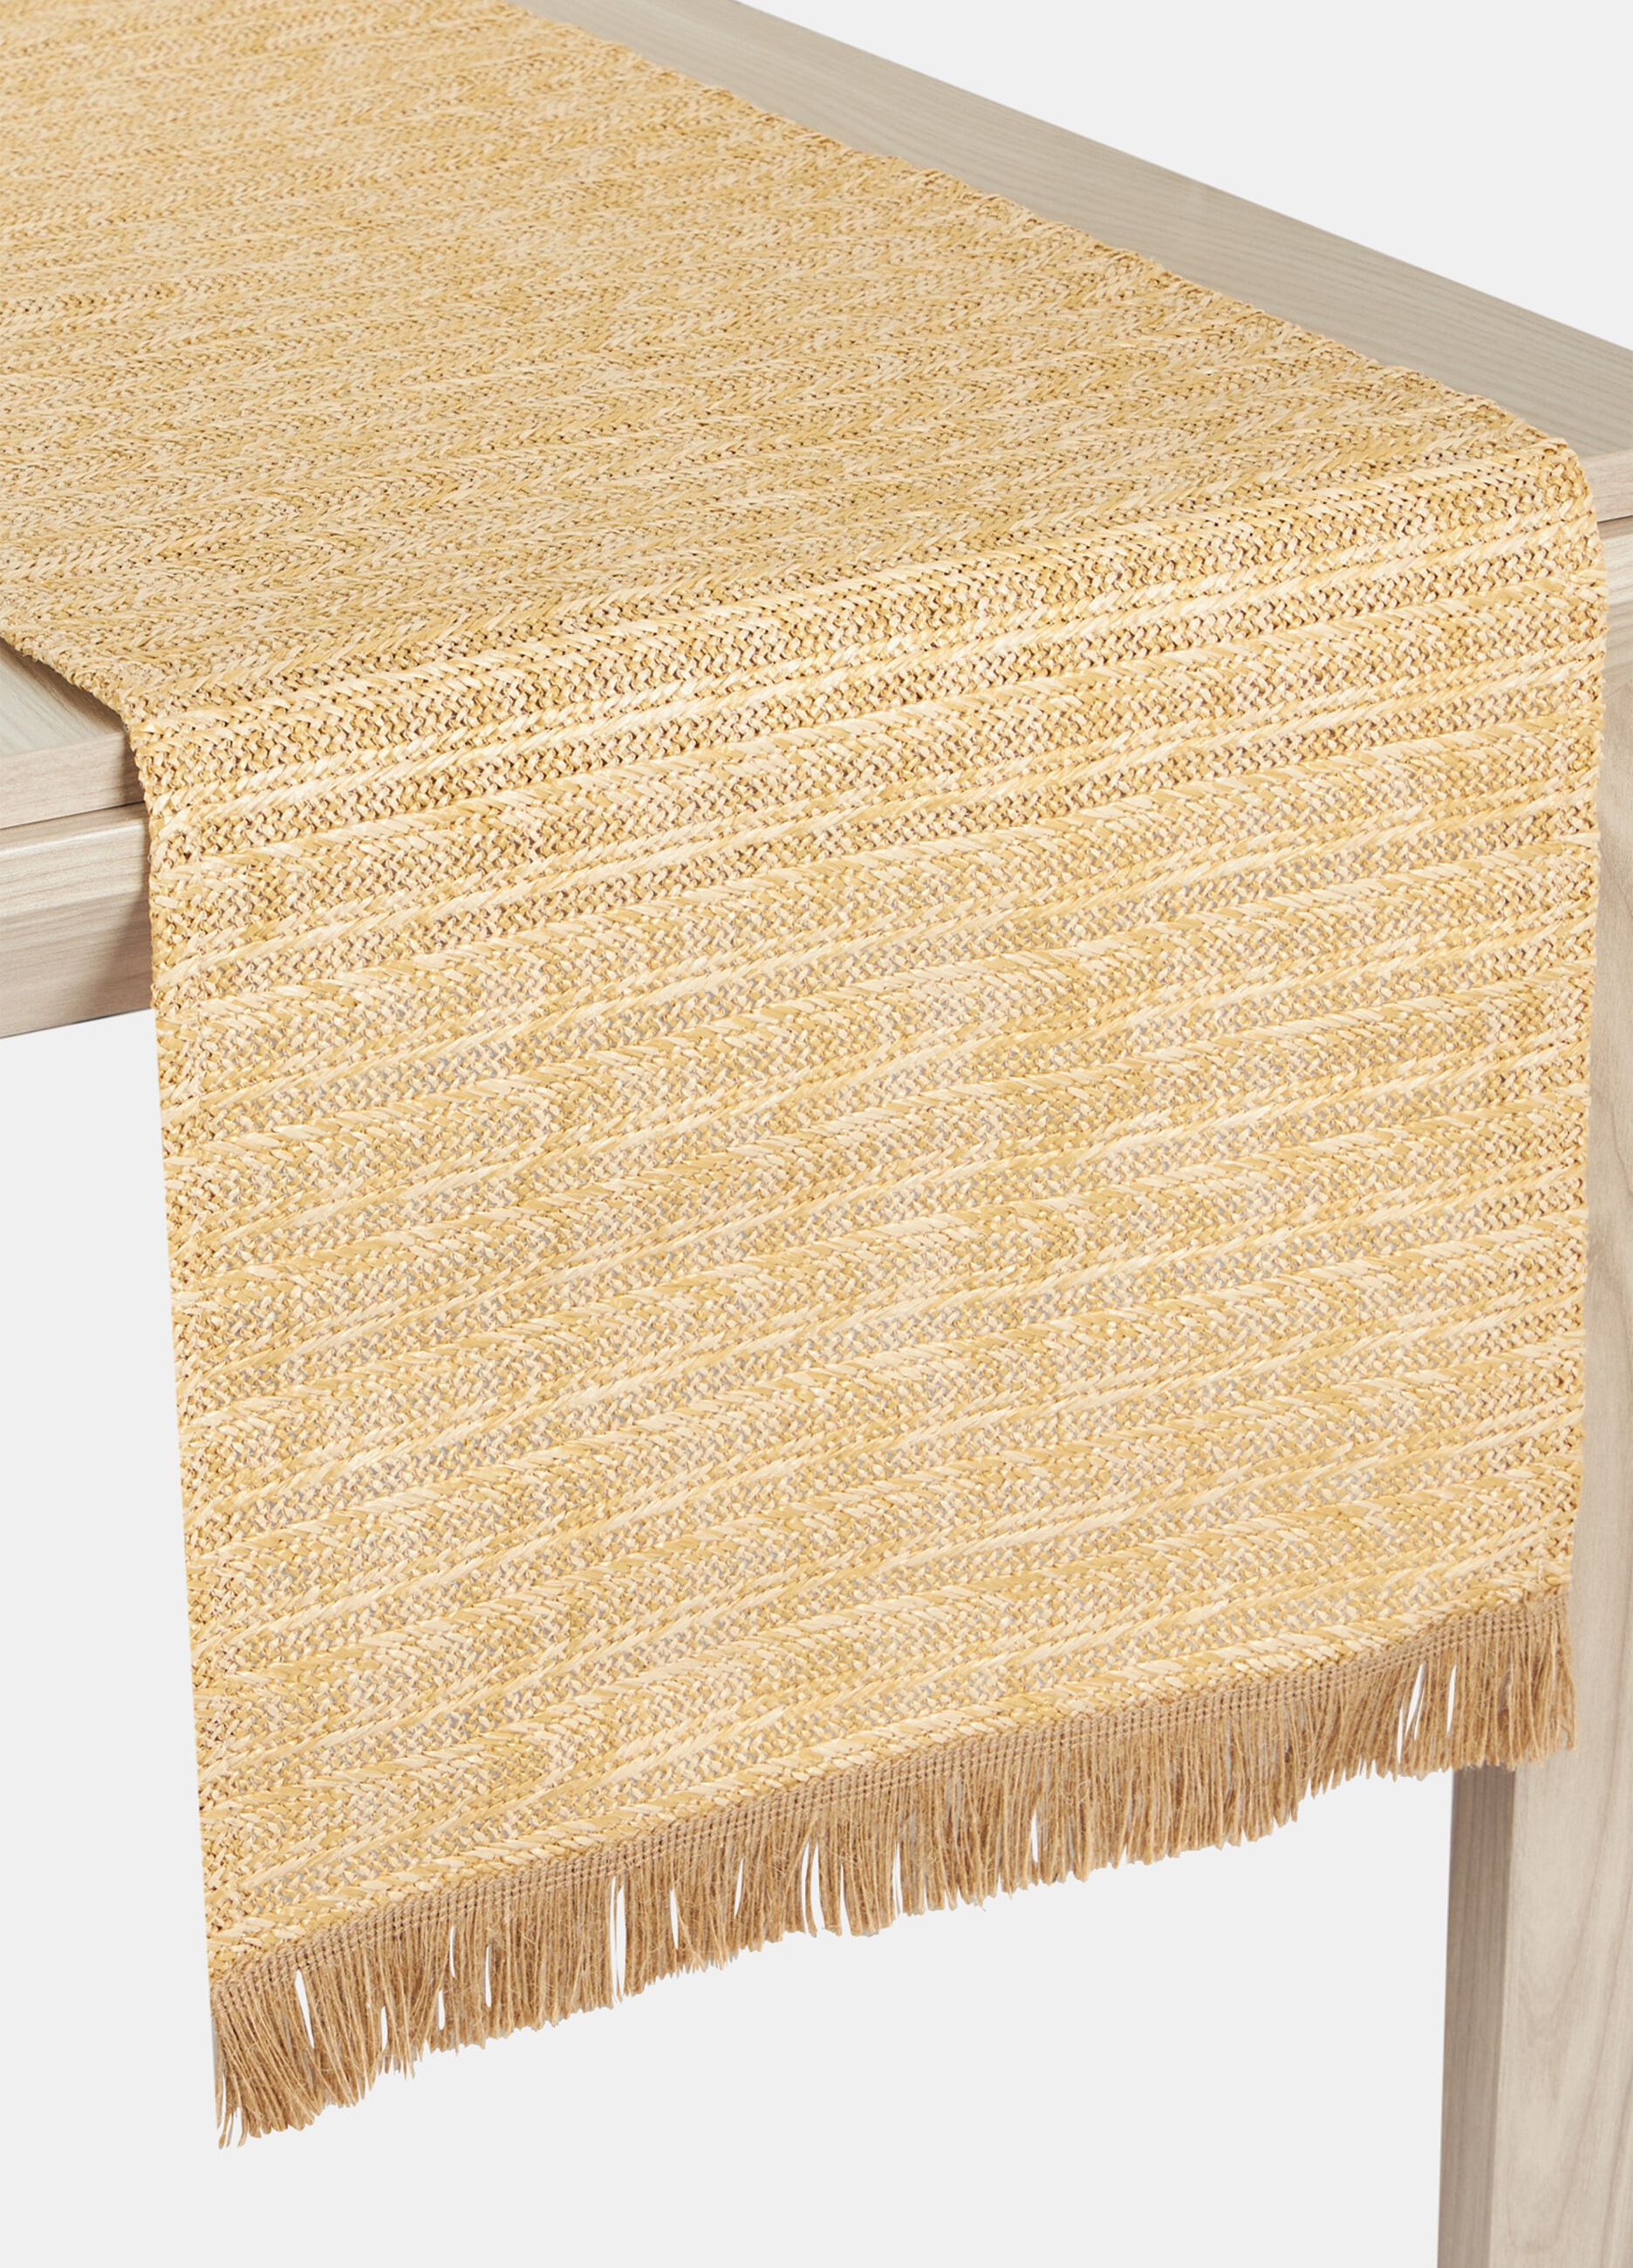 Table runner with fringing